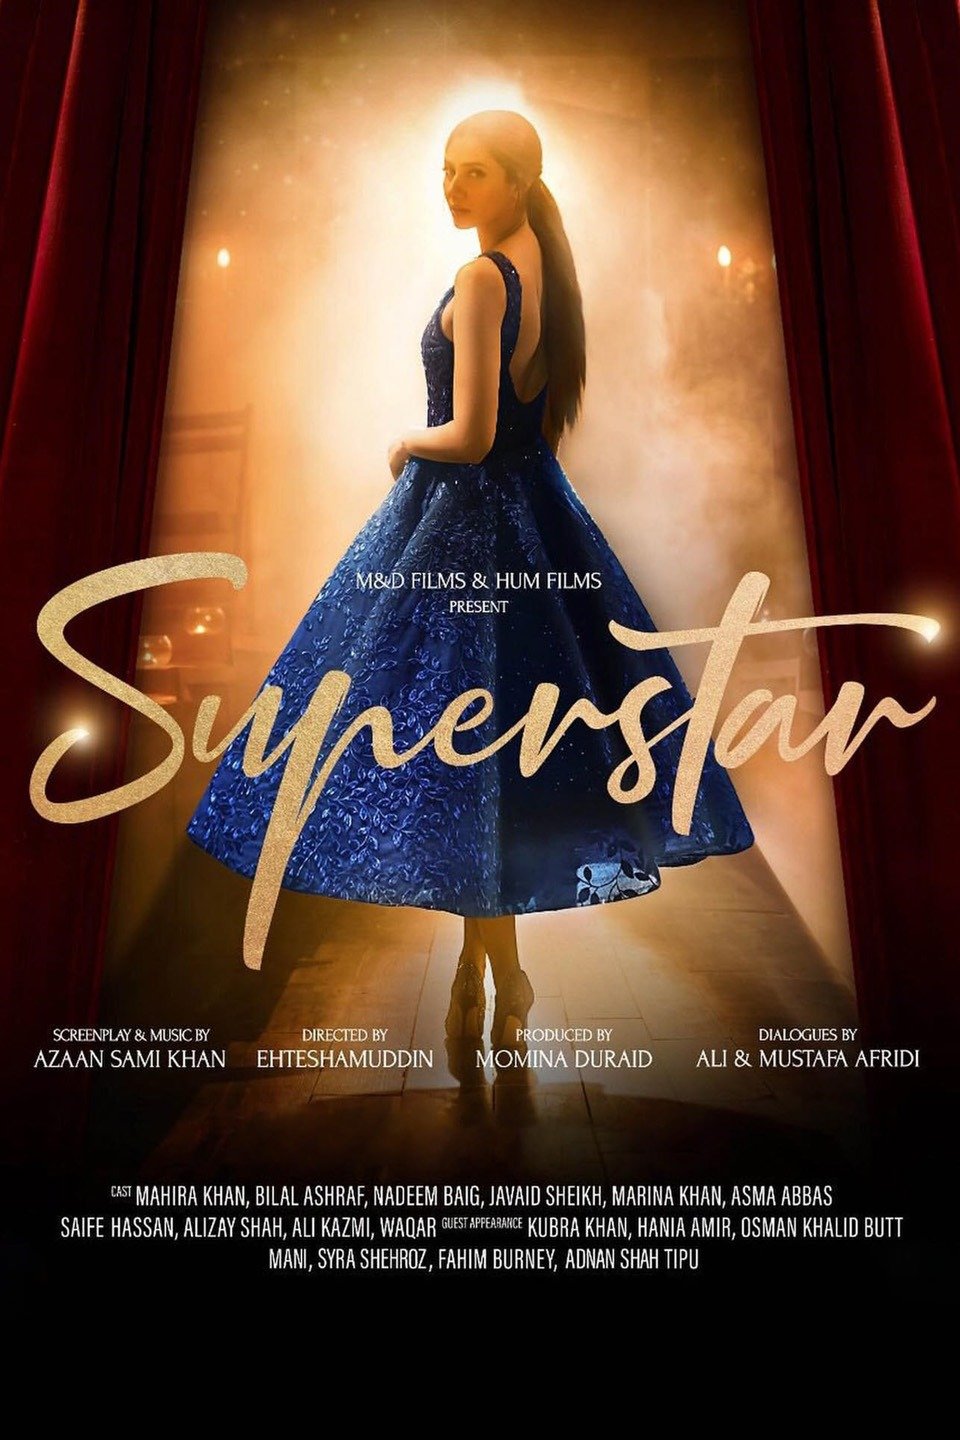 Superstar: Trailer 1 - Trailers & Videos - Rotten Tomatoes